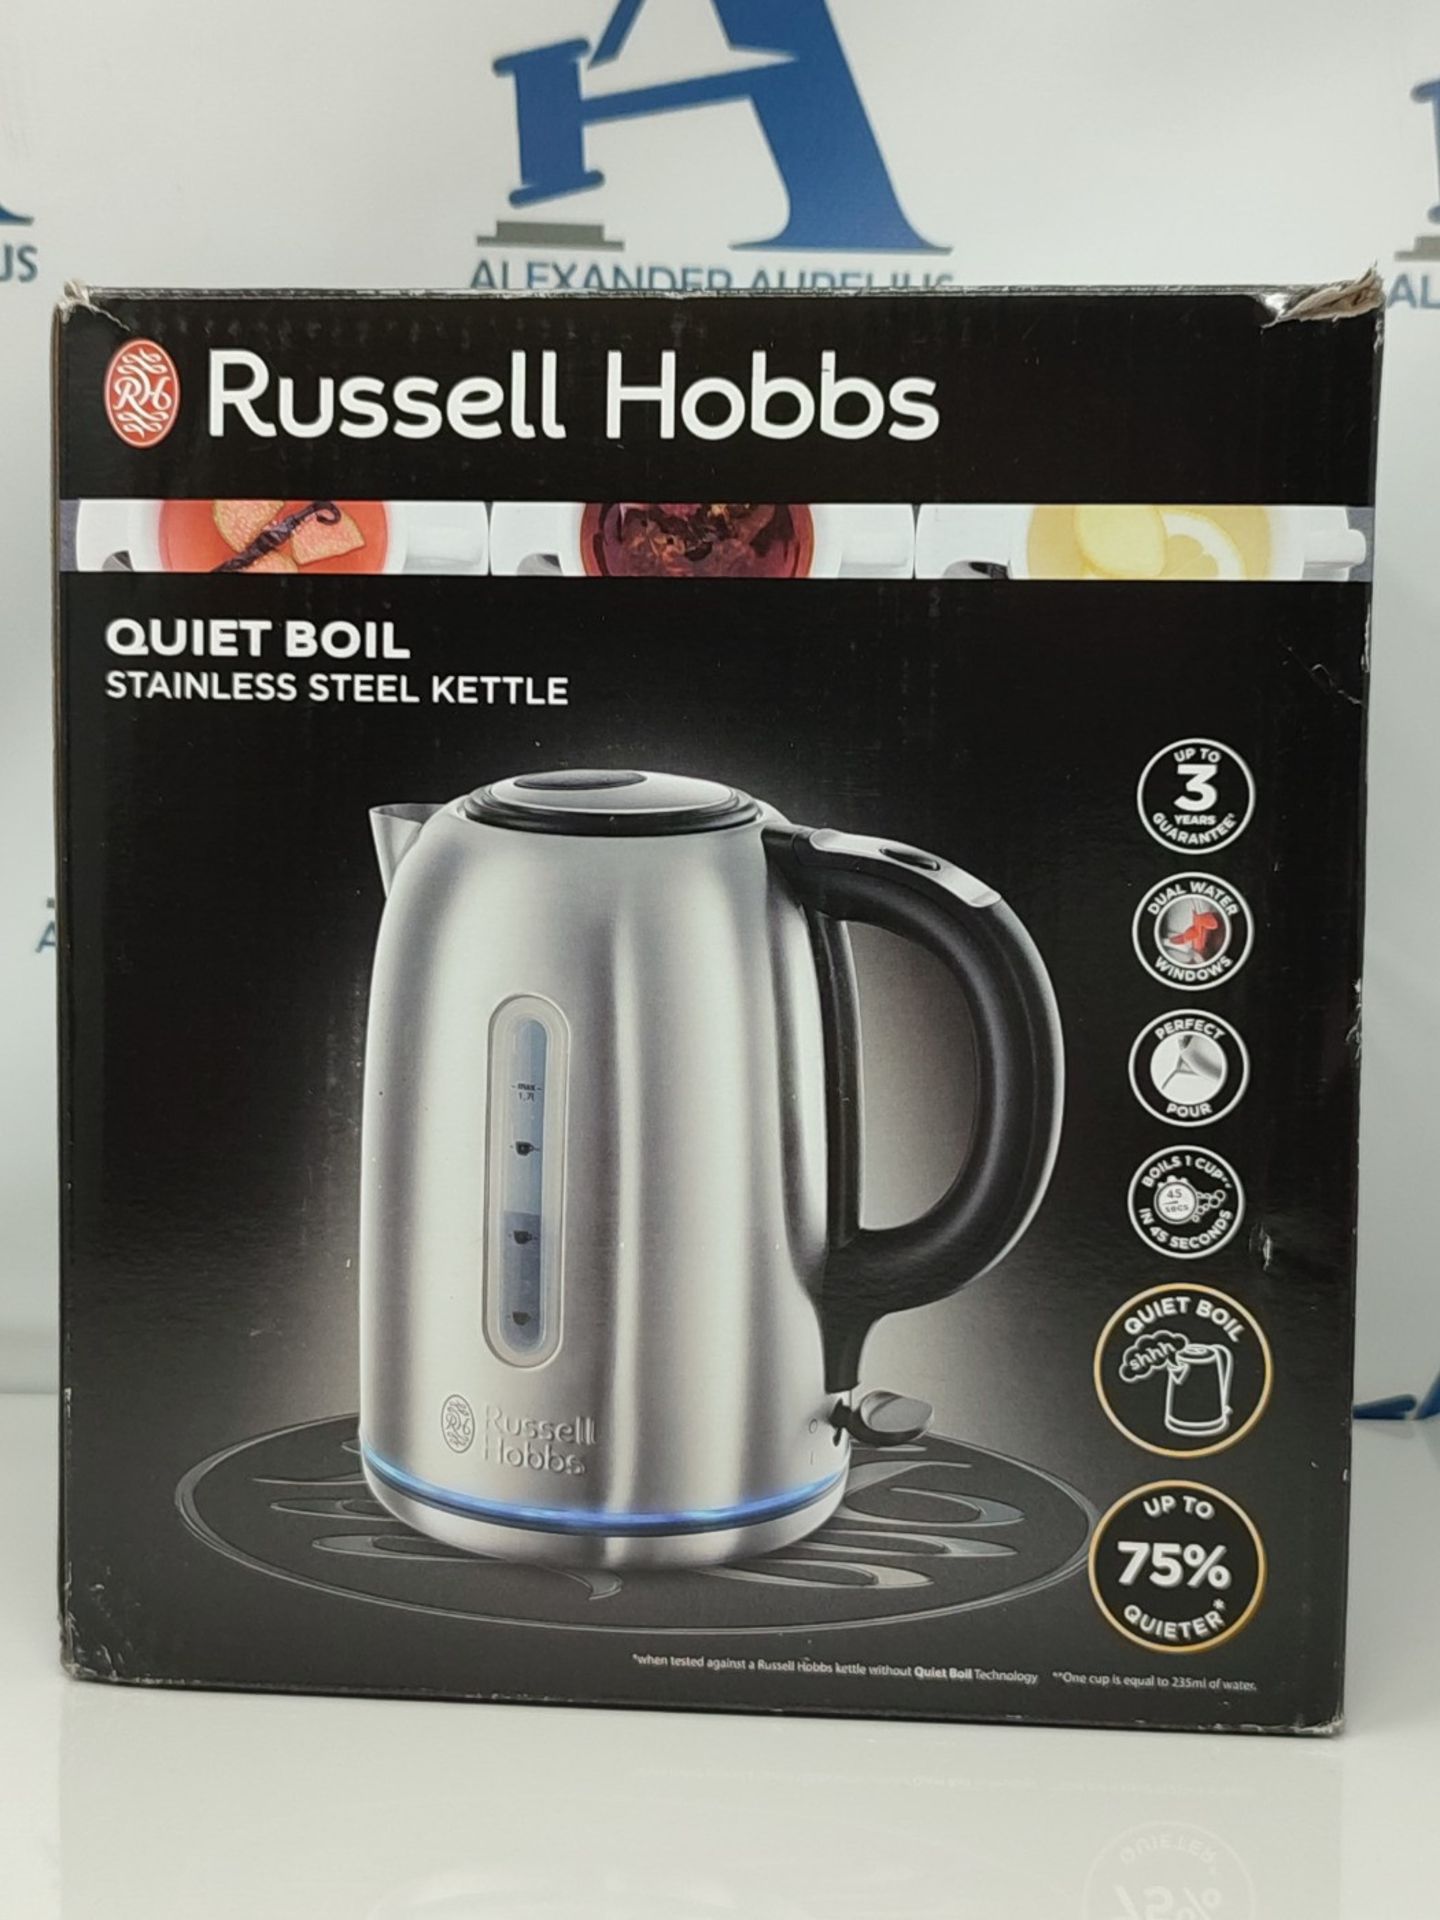 Russell Hobbs 20460 Quiet Boil Kettle, Brushed Stainless Steel, 3000W, 1.7 Litres - Image 2 of 3